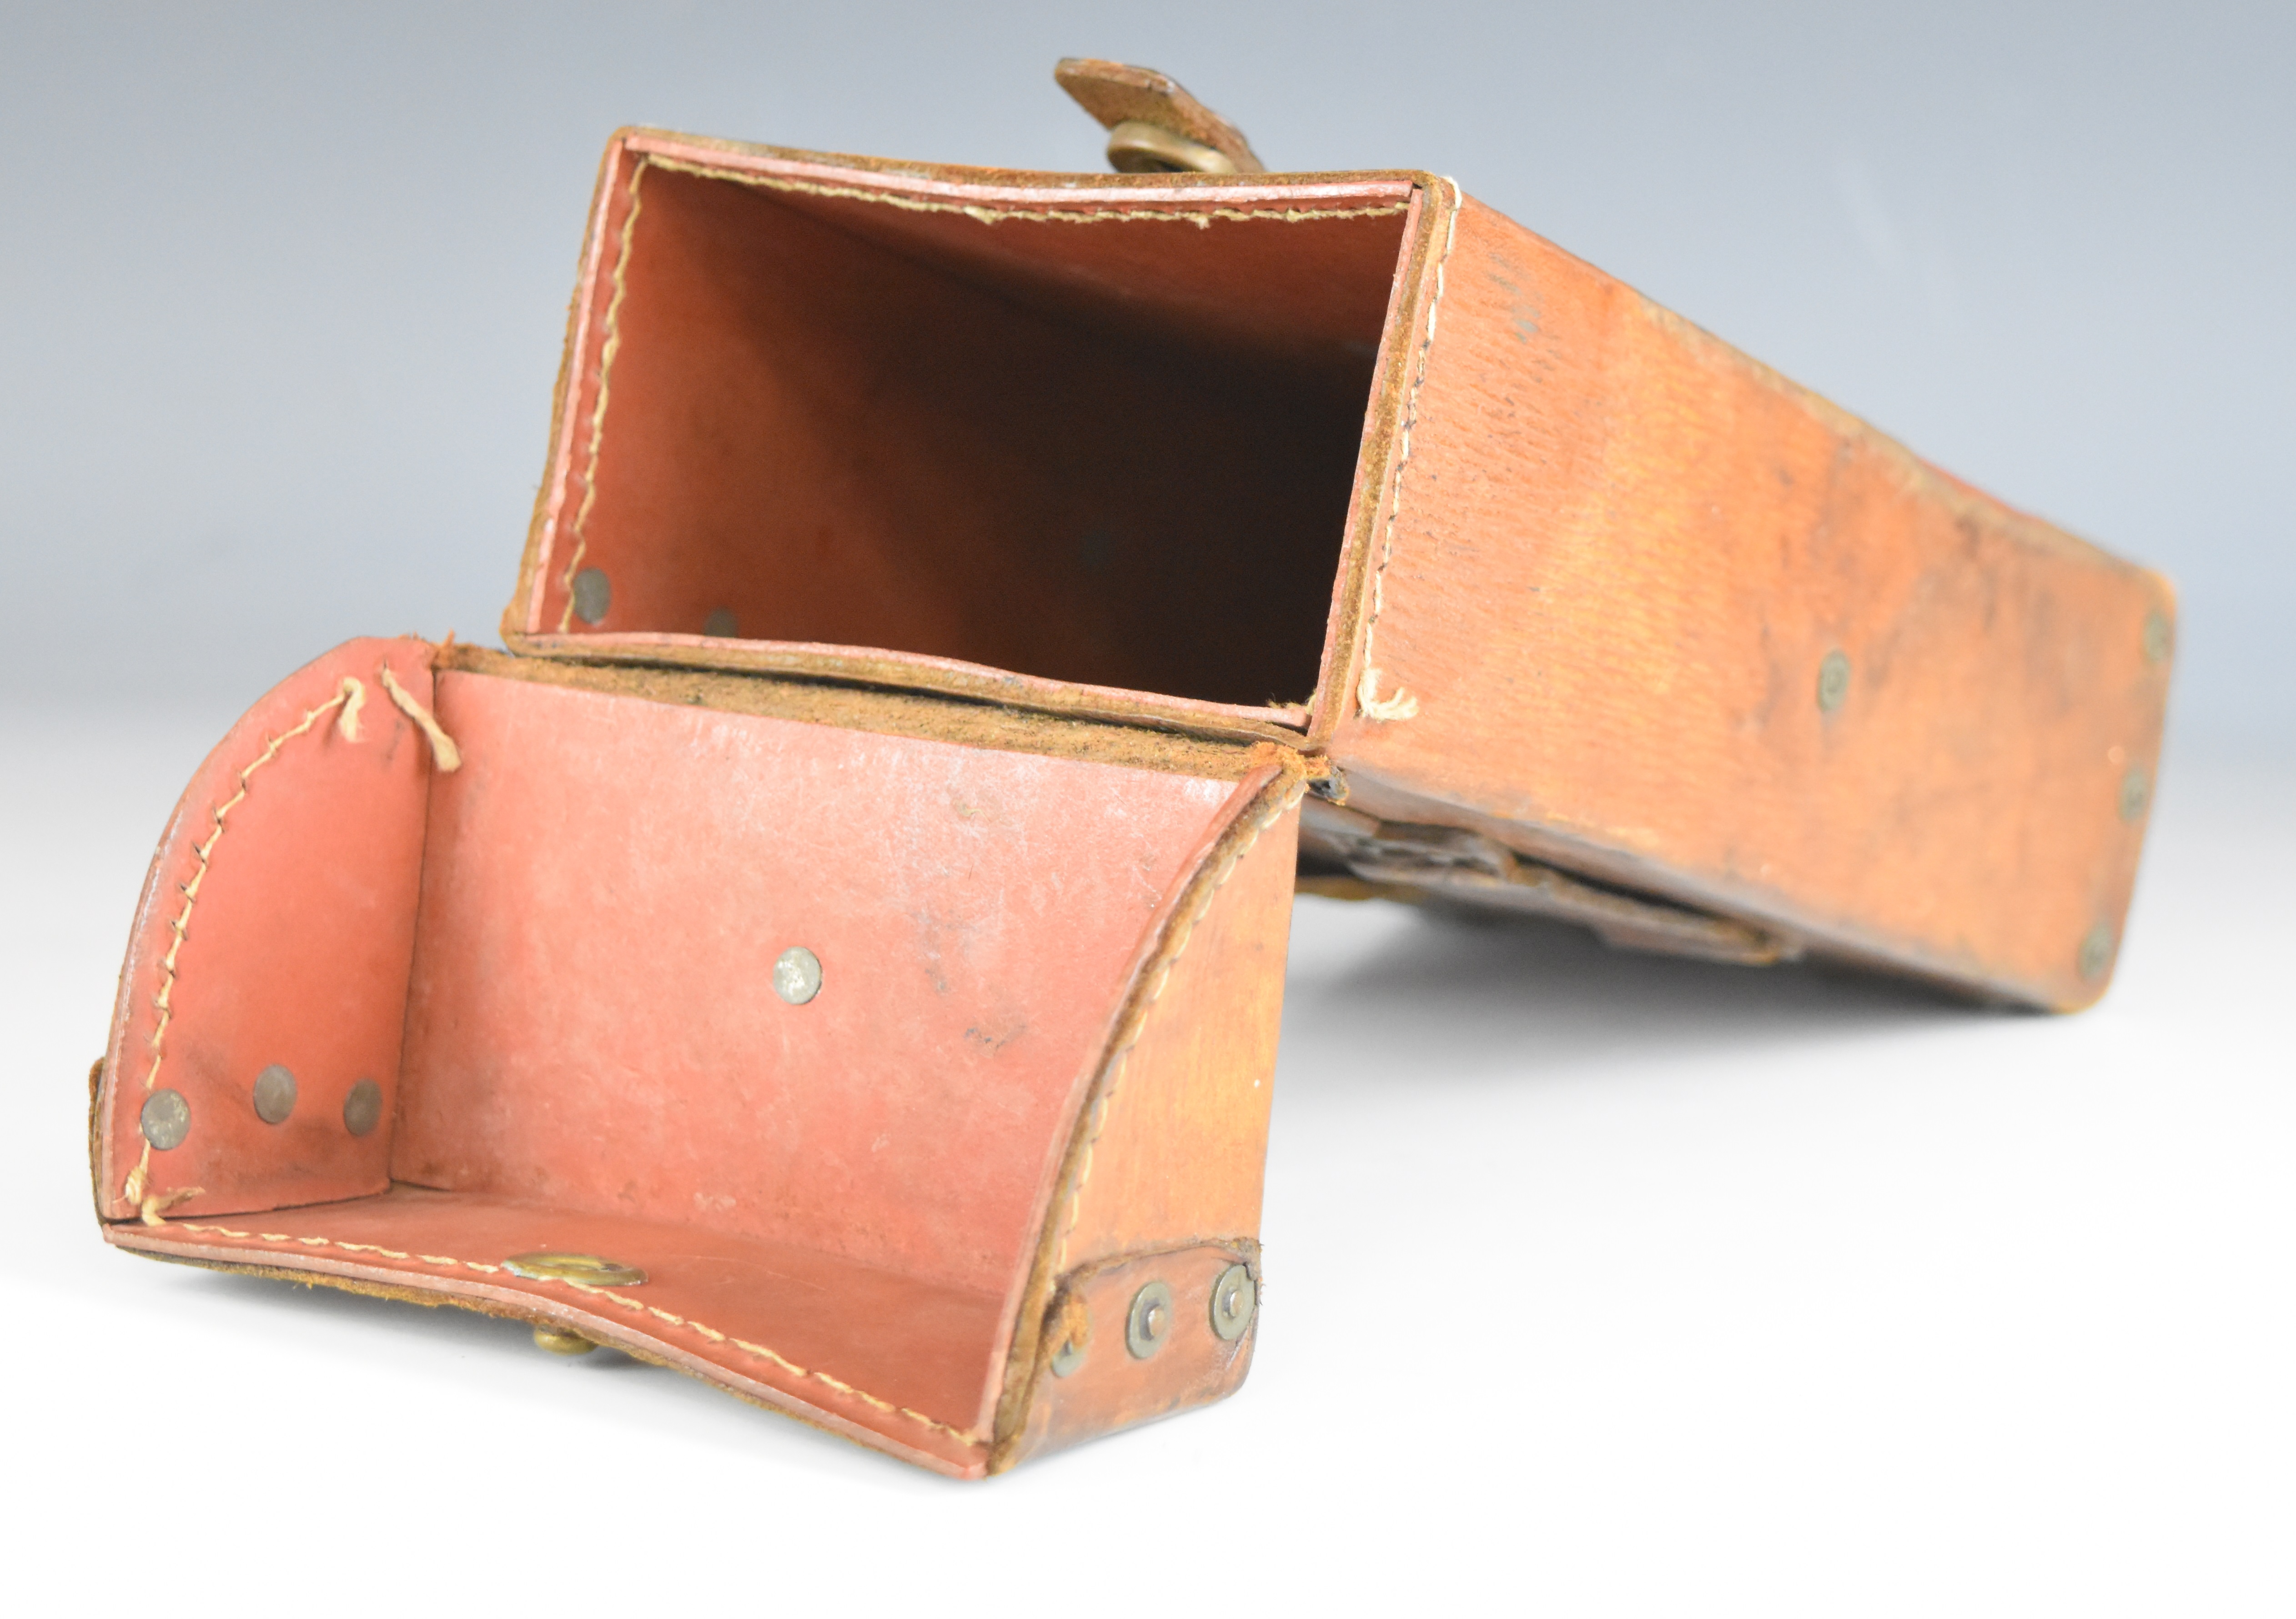 WW2 British army leather magazine pouch or holster with brass fittings, 24 x 12 x 7.5cm. - Image 5 of 6